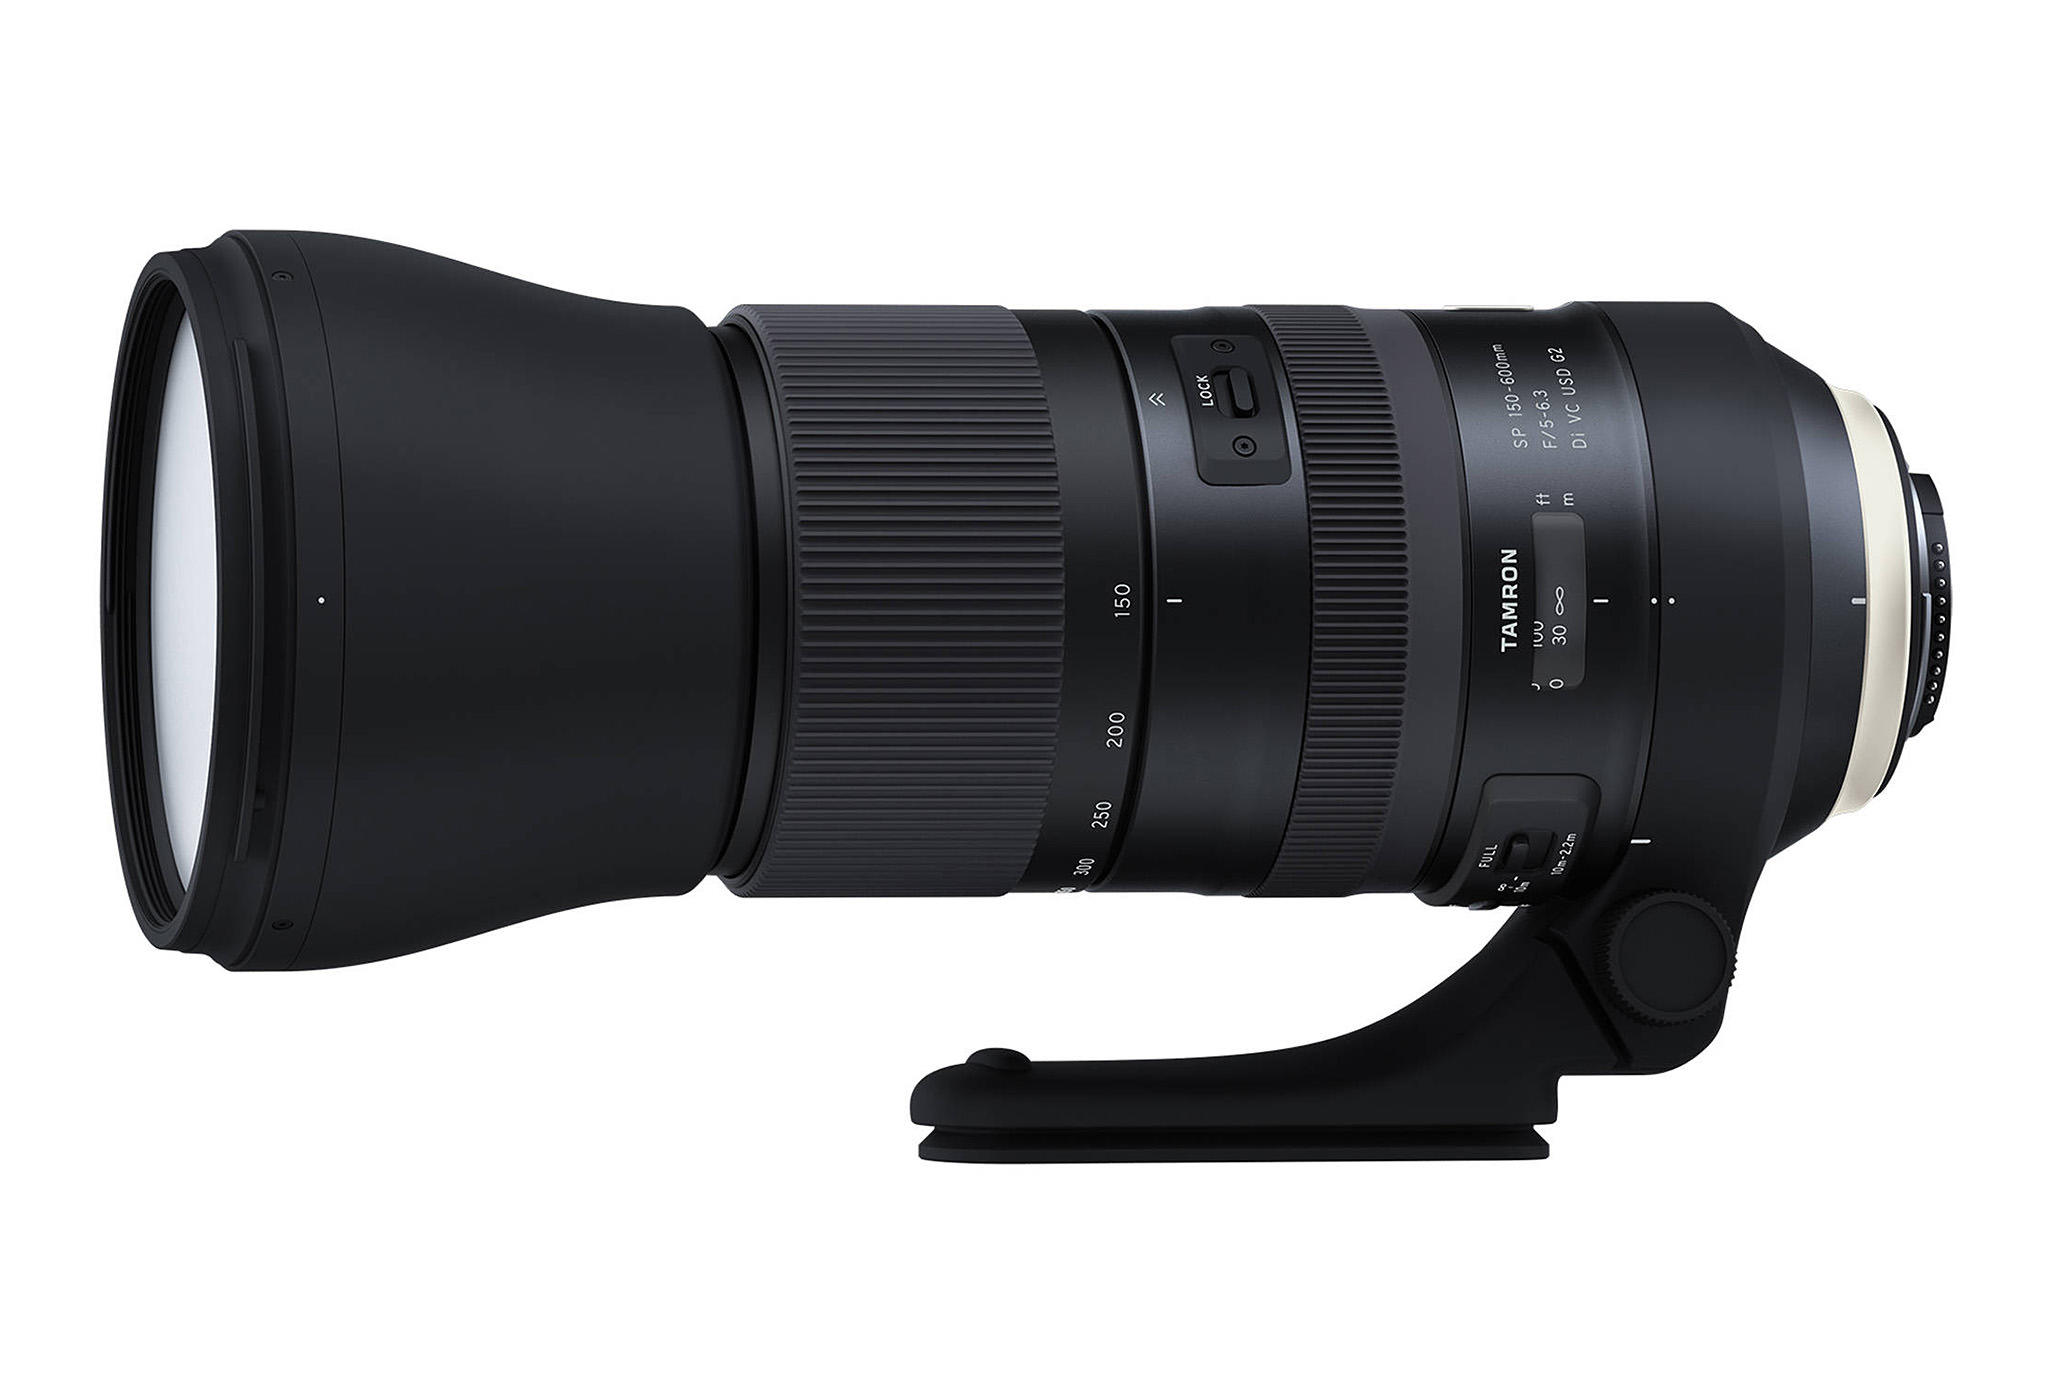 Tamron SP 150-600mm f/5-6.3 G2 Review